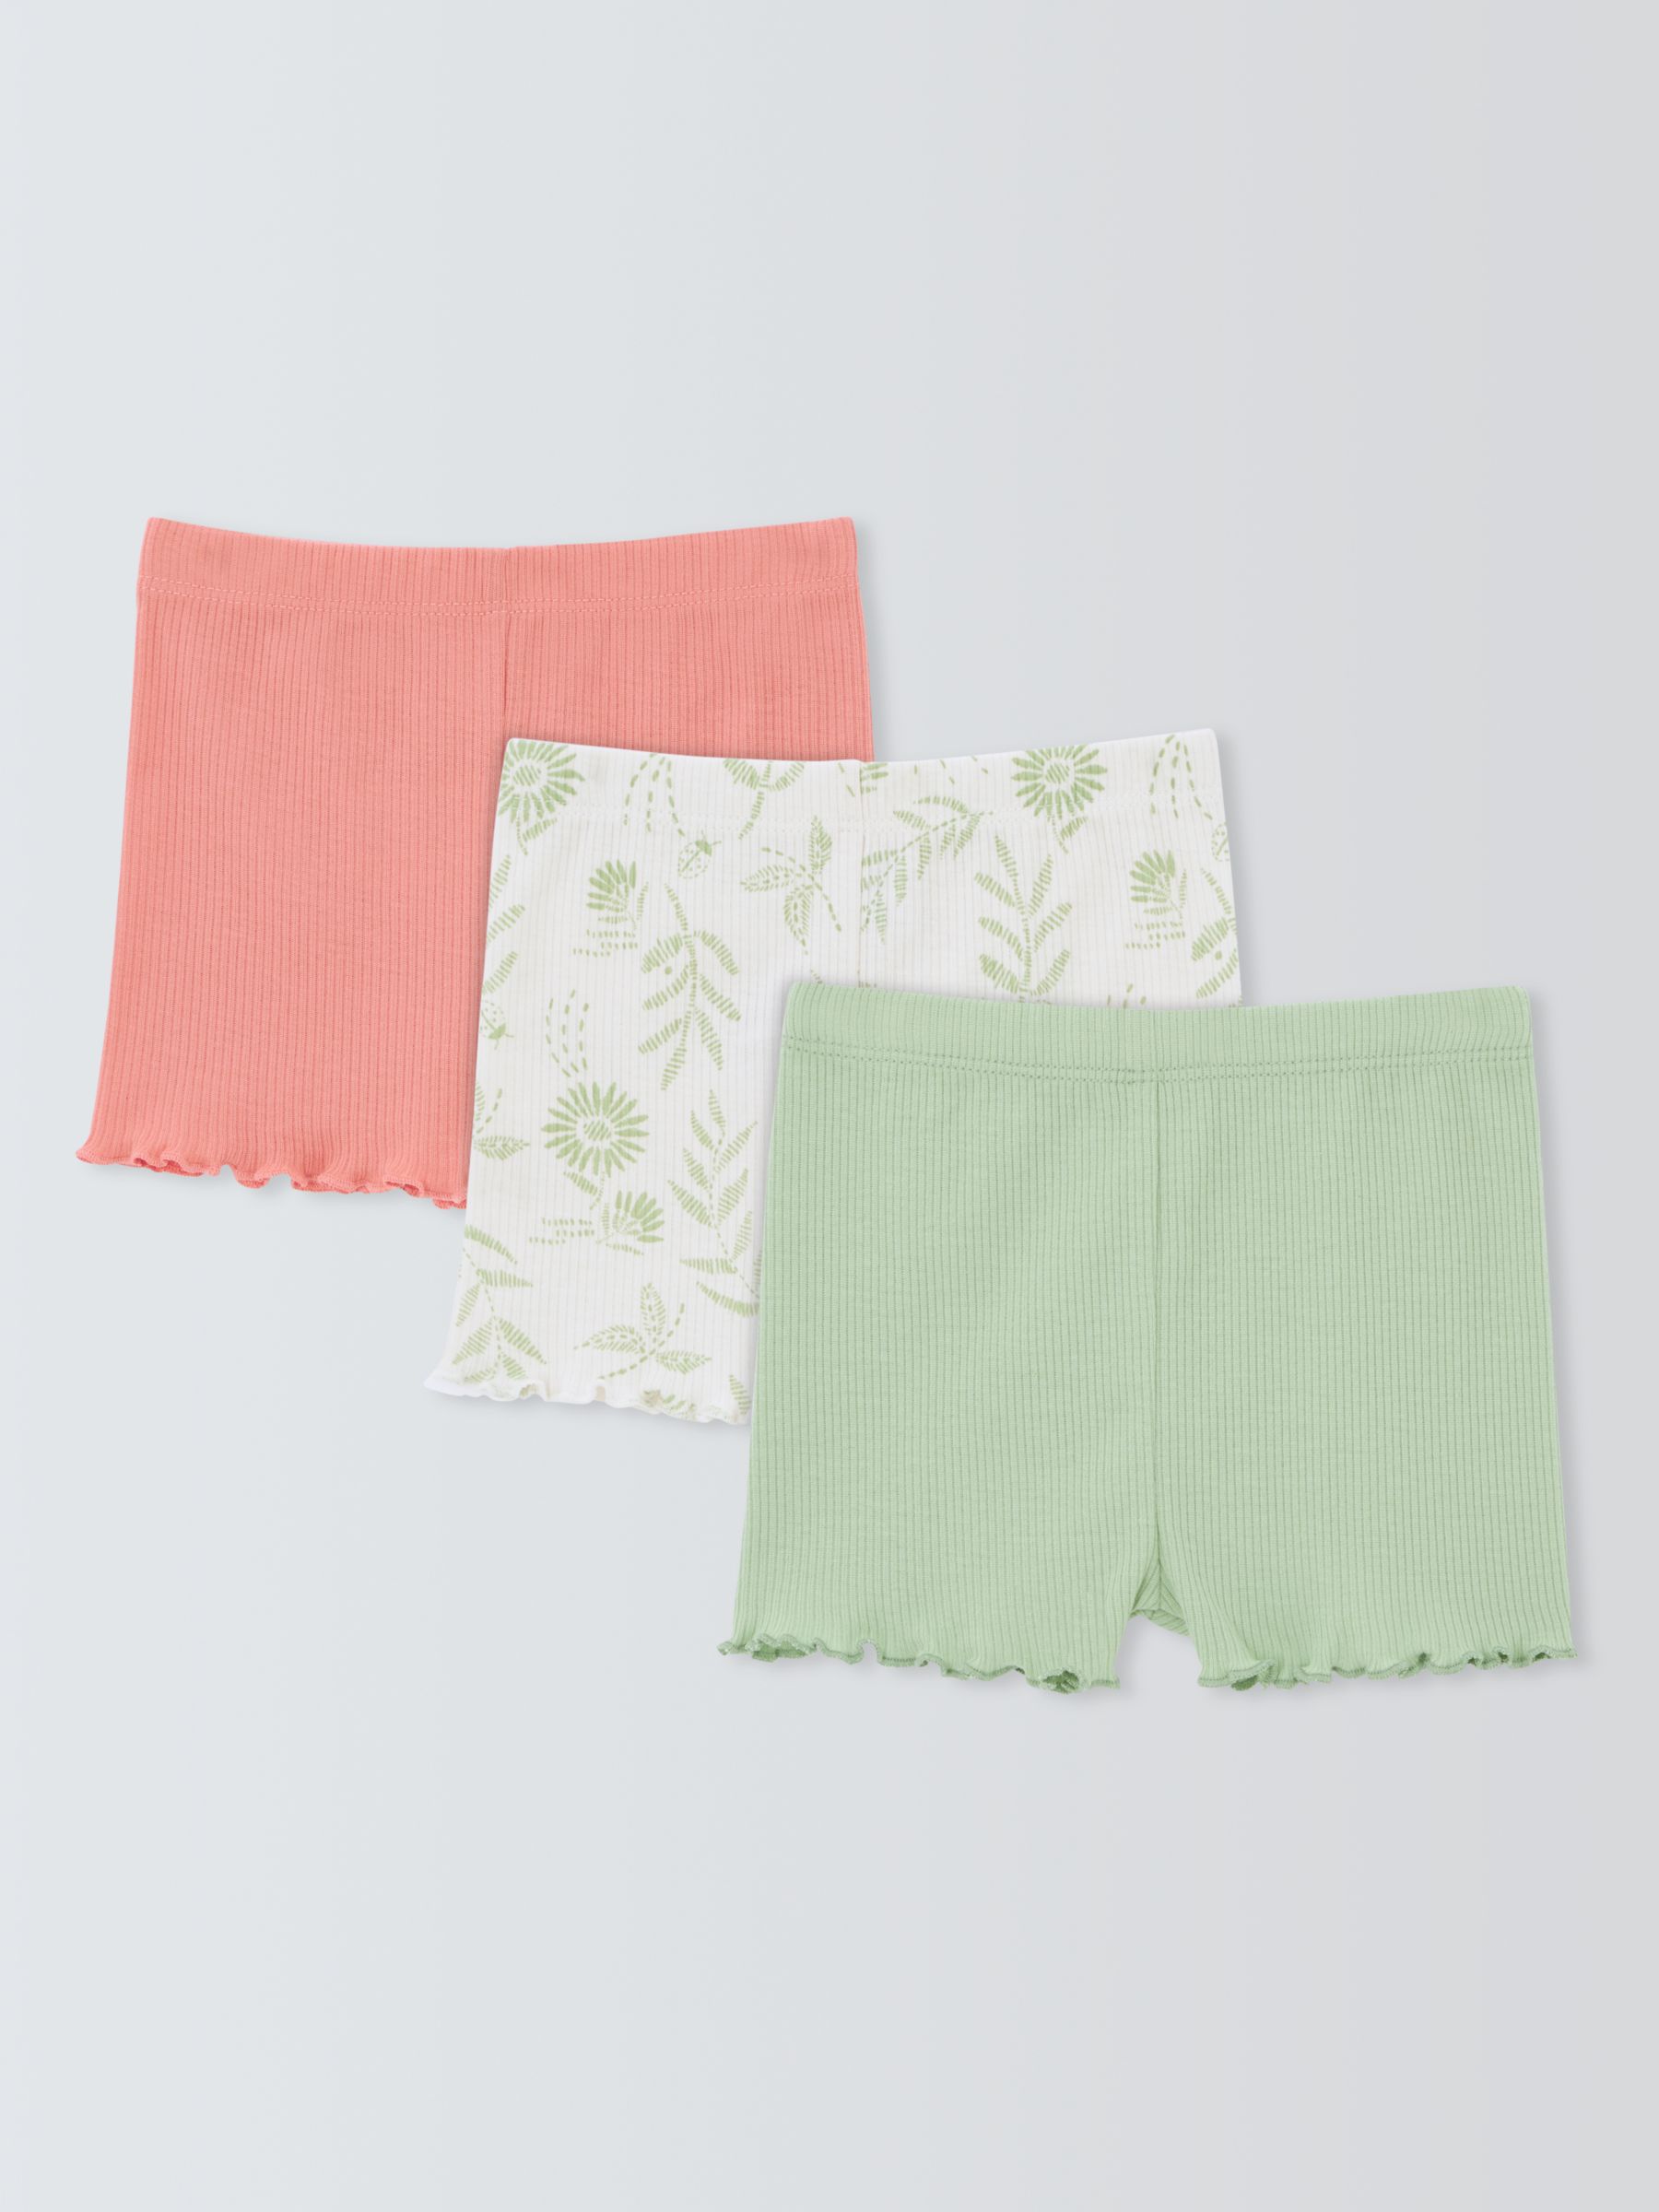 John Lewis Baby Ribbed Shorts, Pack of 3, Multi, 6-9 months